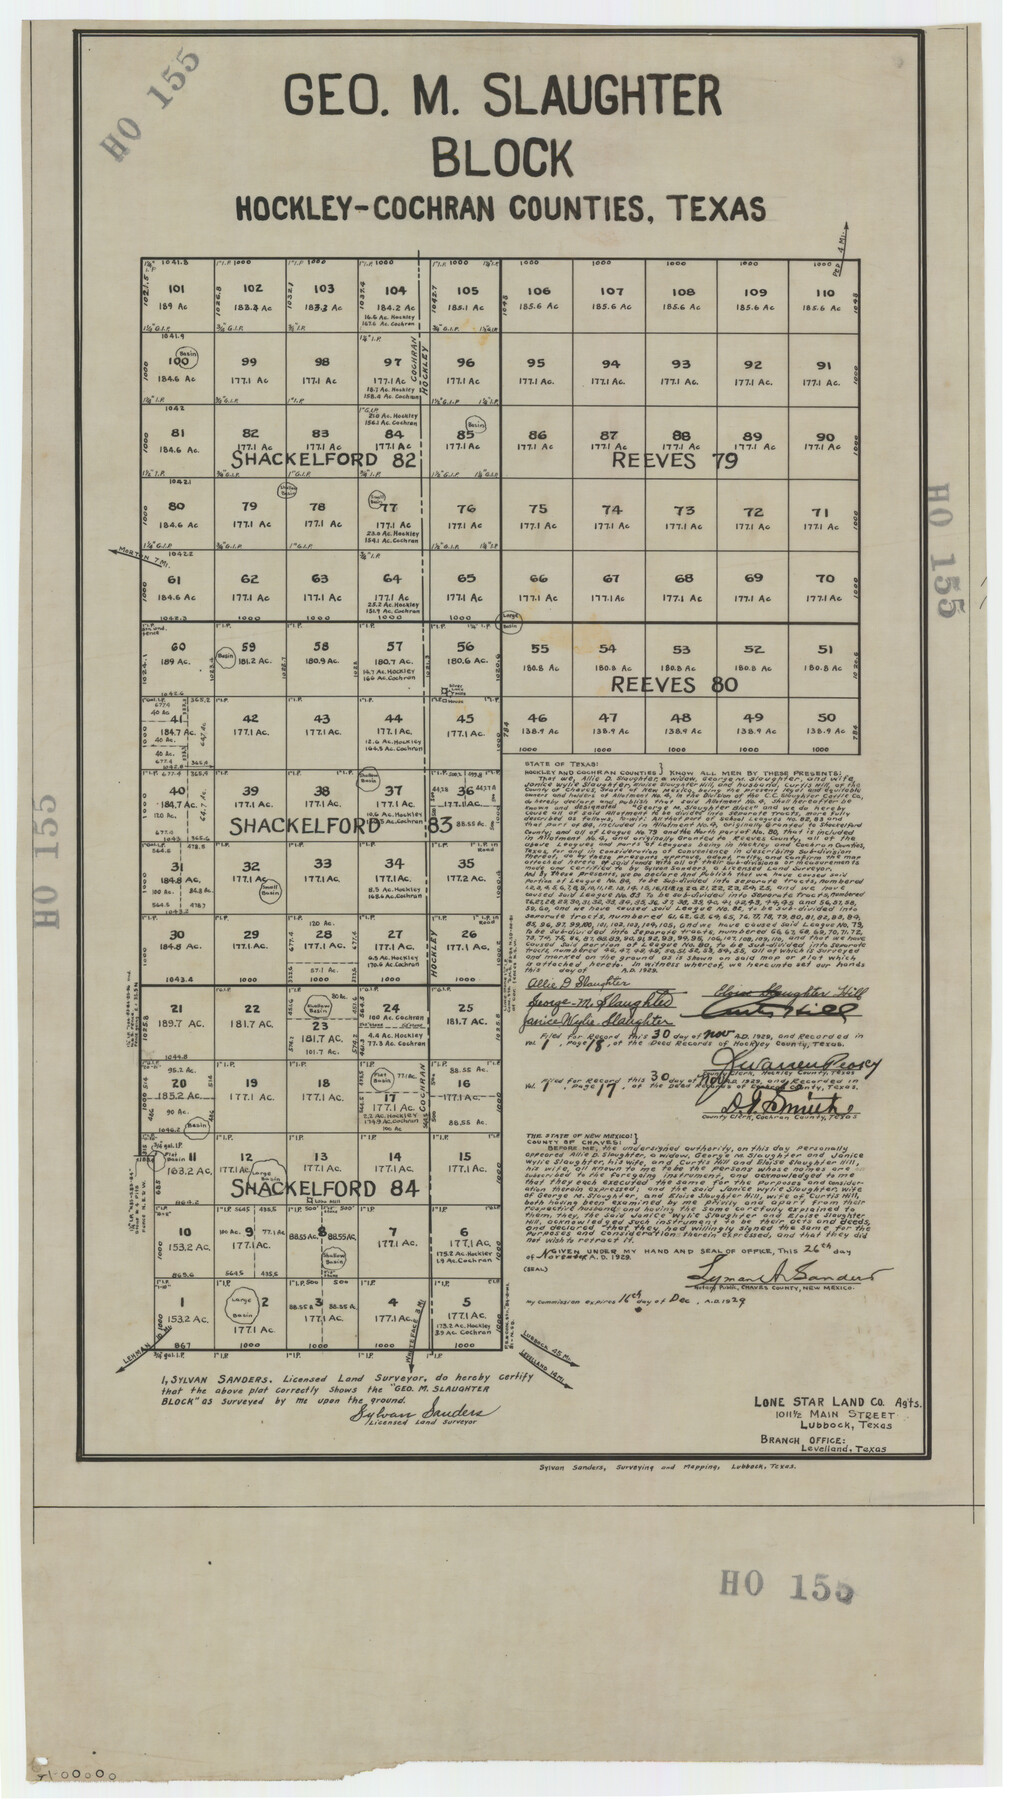 92238, George M. Slaughter Block Hockley and Cochran Counties, Texas, Twichell Survey Records